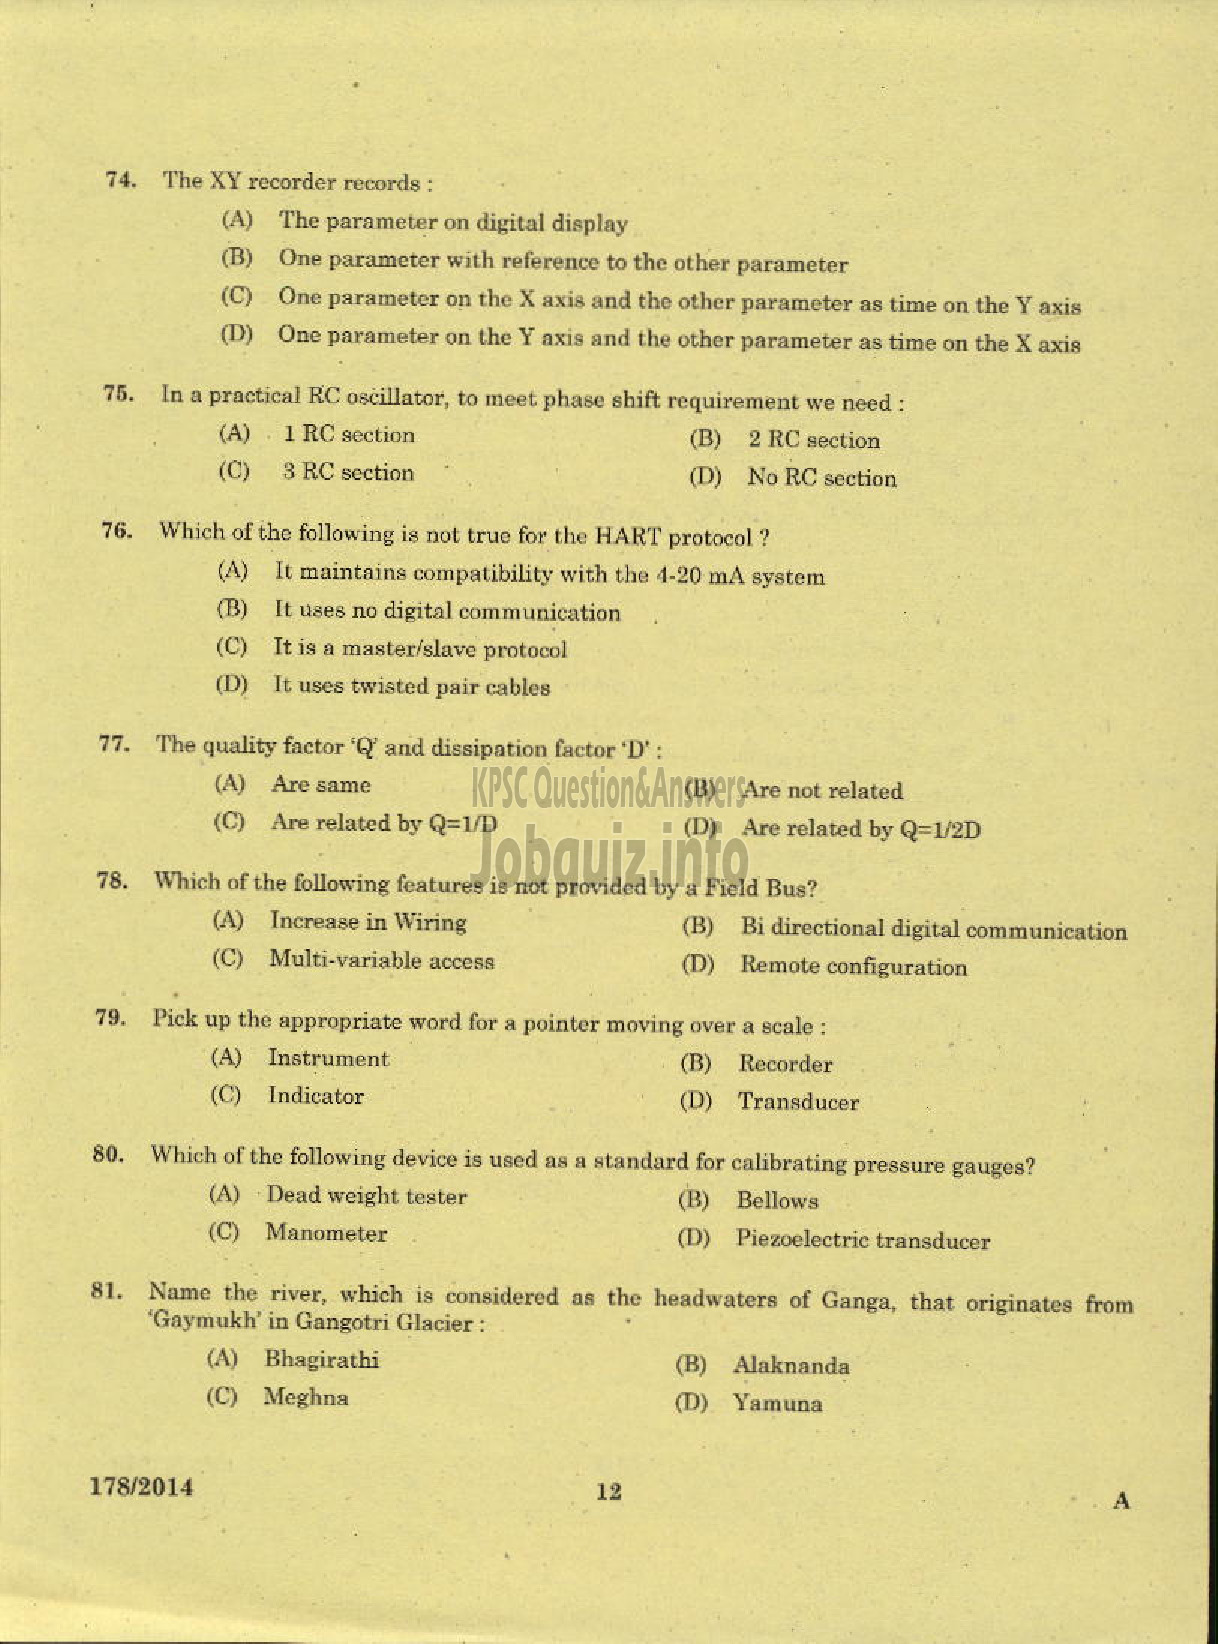 Kerala PSC Question Paper - TRADESMAN ELECTRONICS AND INSTRUMENTATION TECHNICAL EDUCATION KNR-10